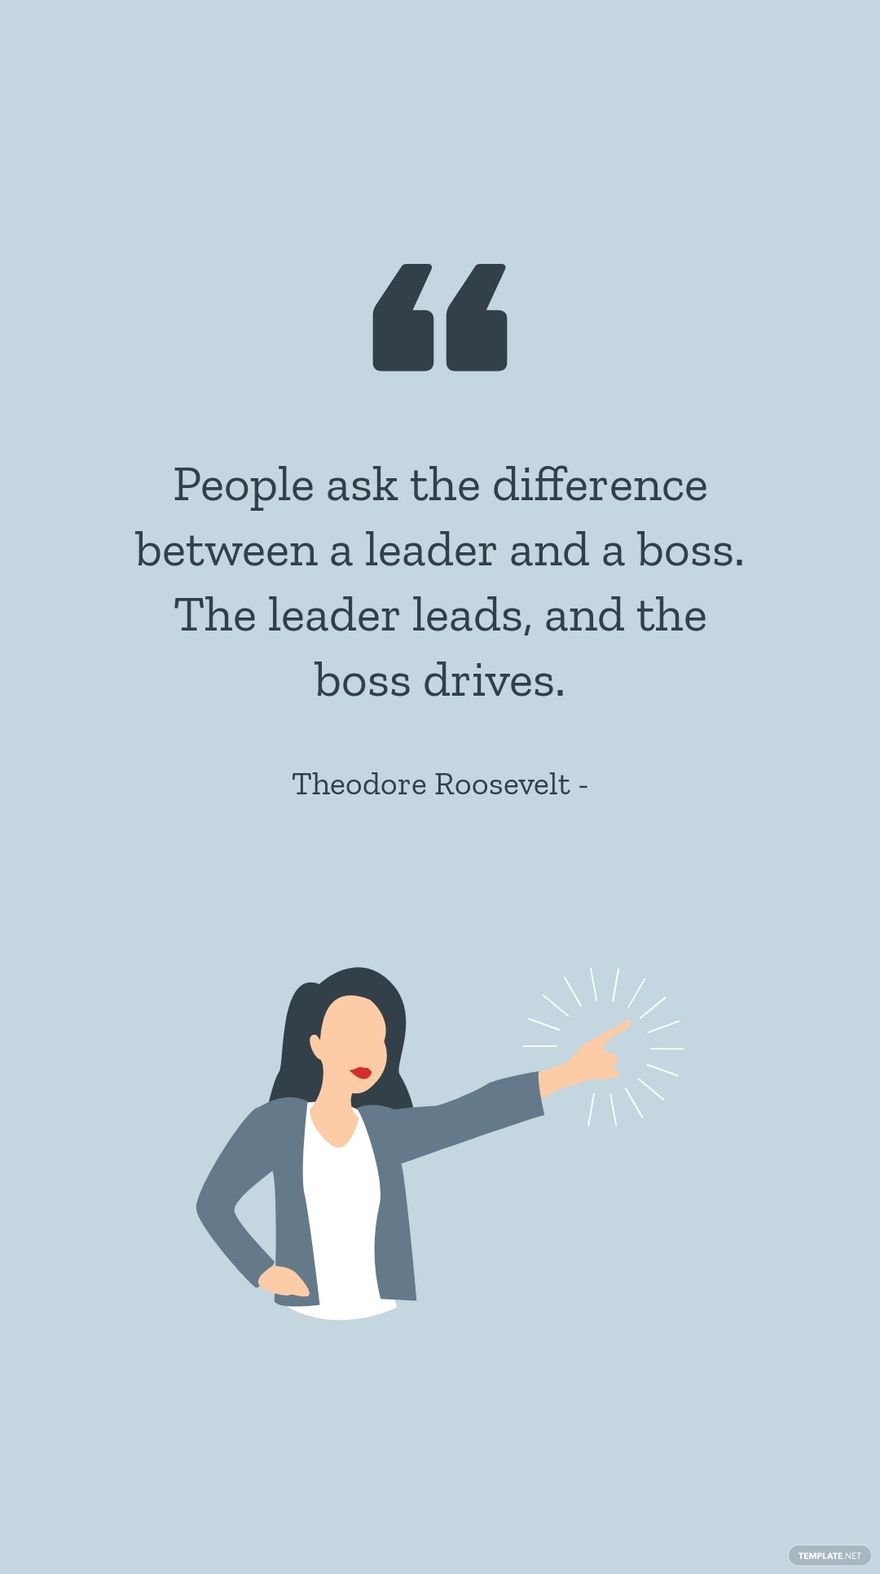 Theodore Roosevelt - People ask the difference between a leader and a boss. The leader leads, and the boss drives.